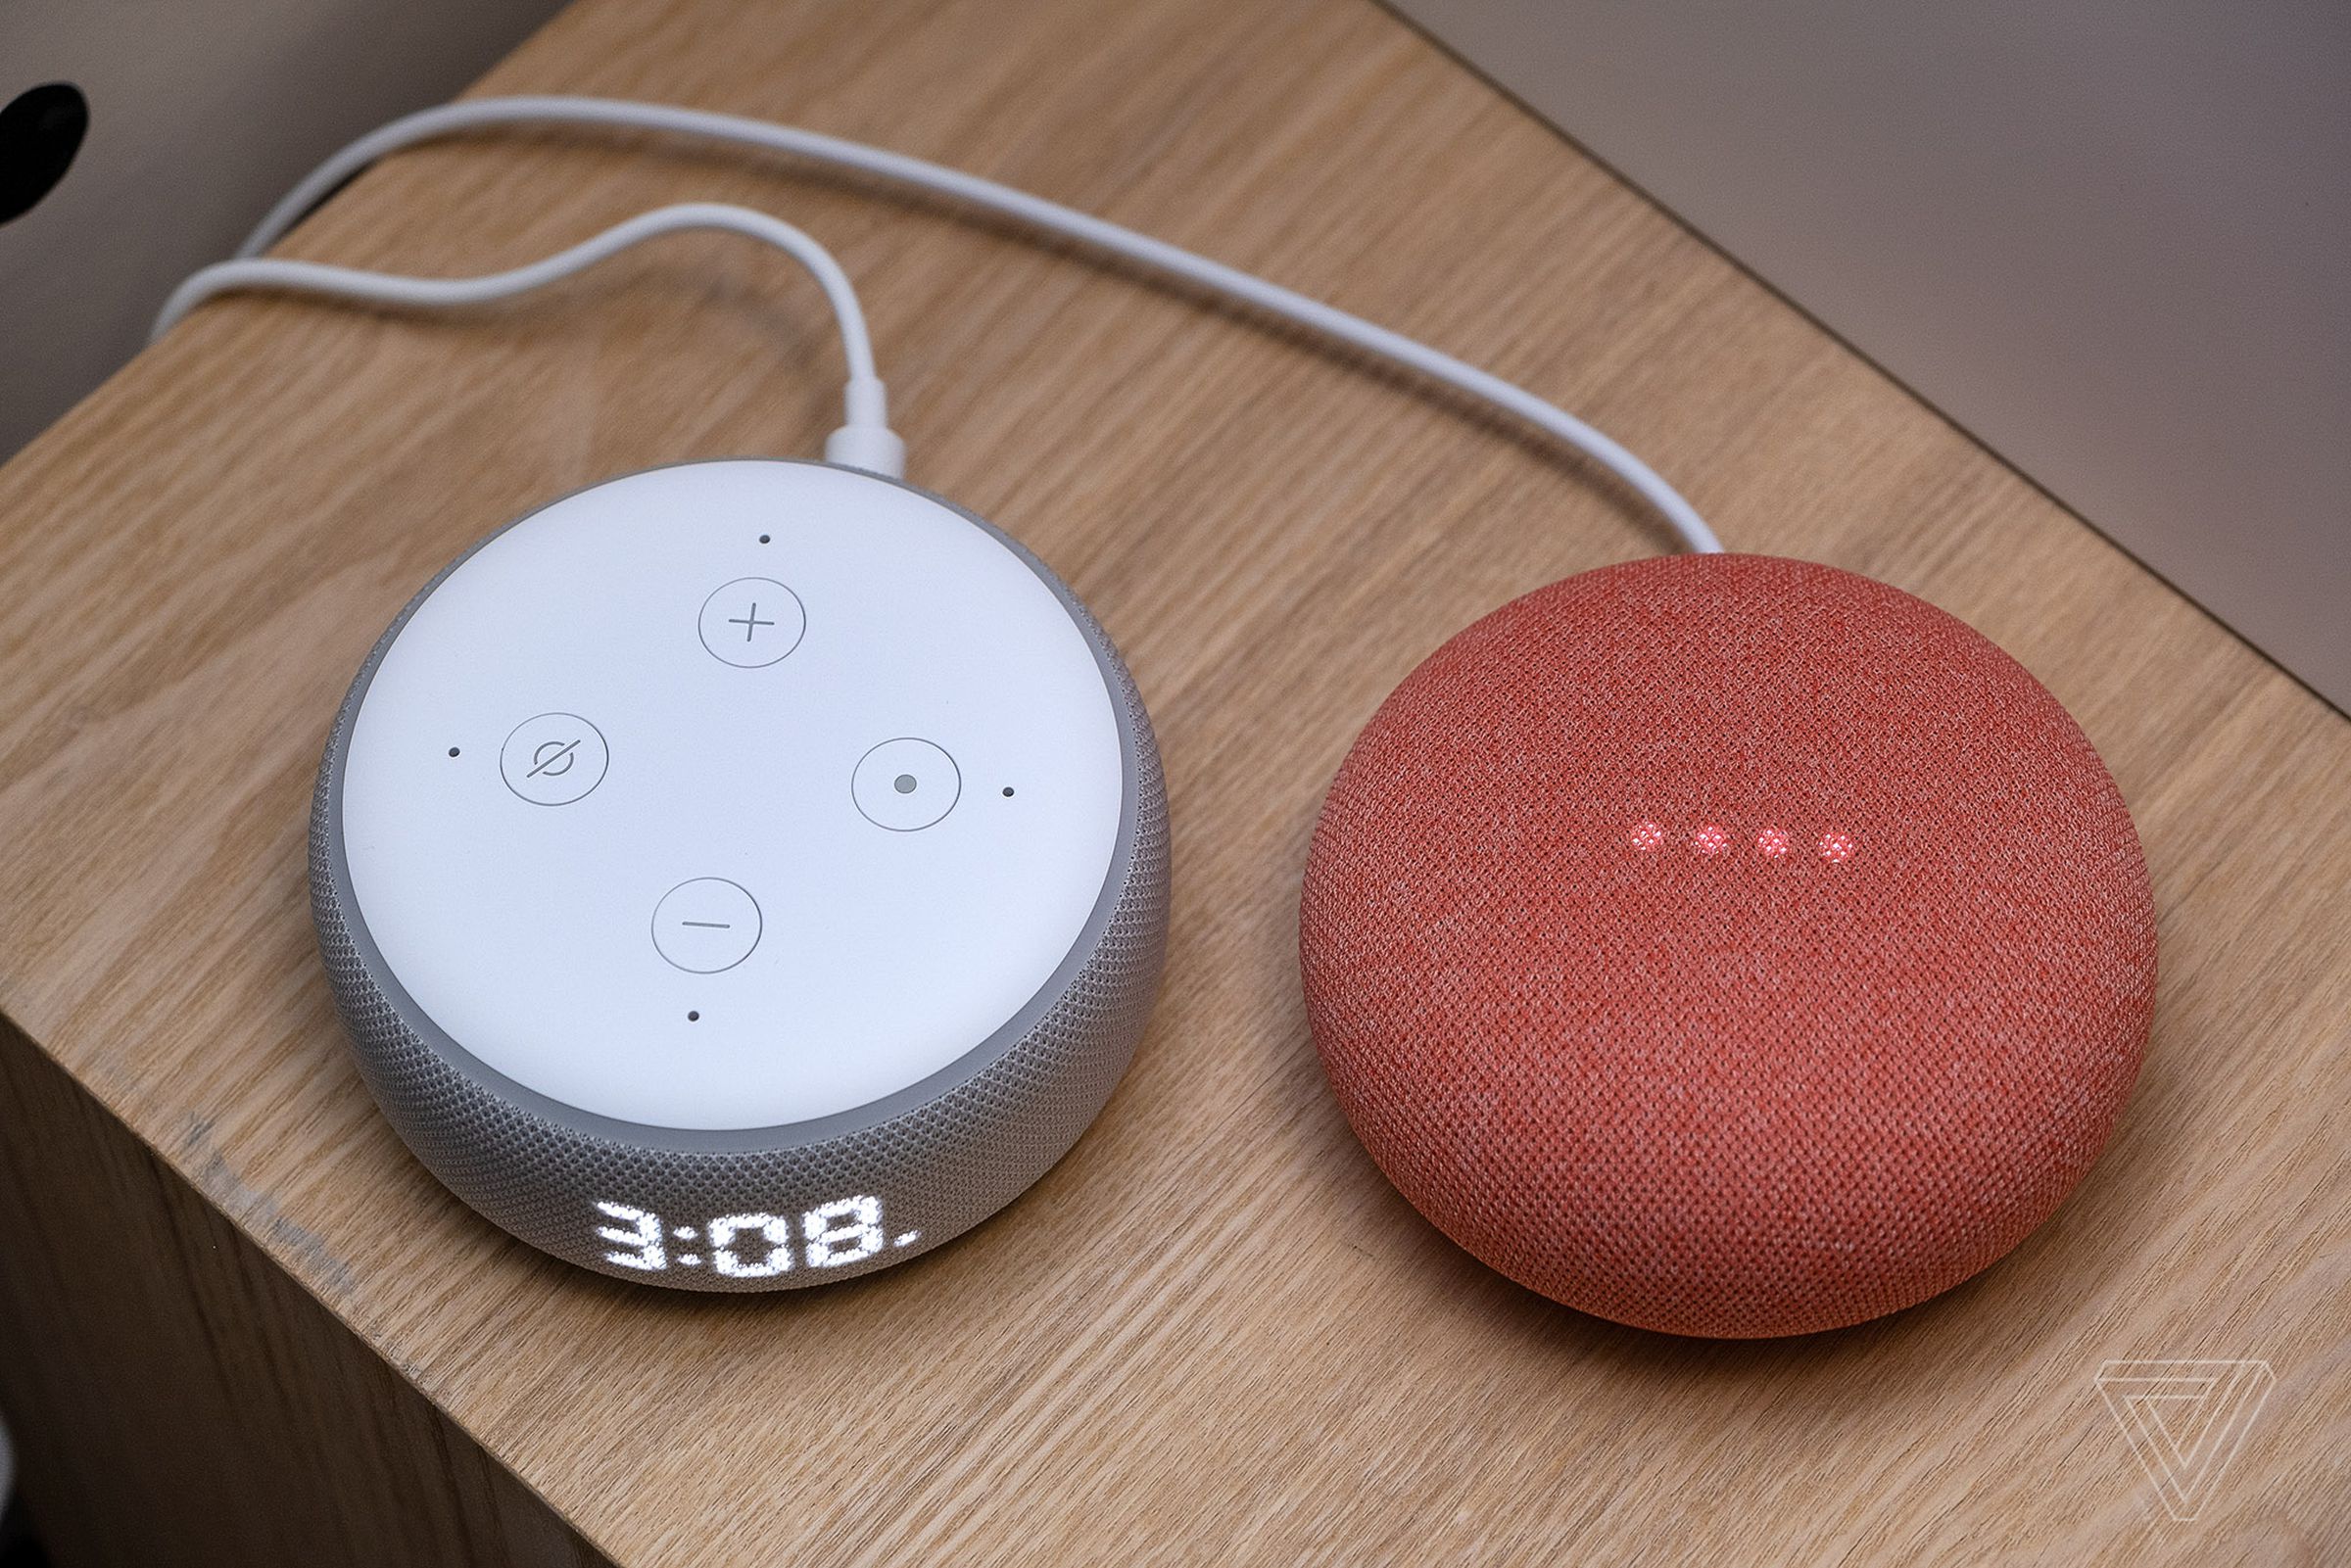 The Echo Dot with clock (left) next to the Nest Mini (right).